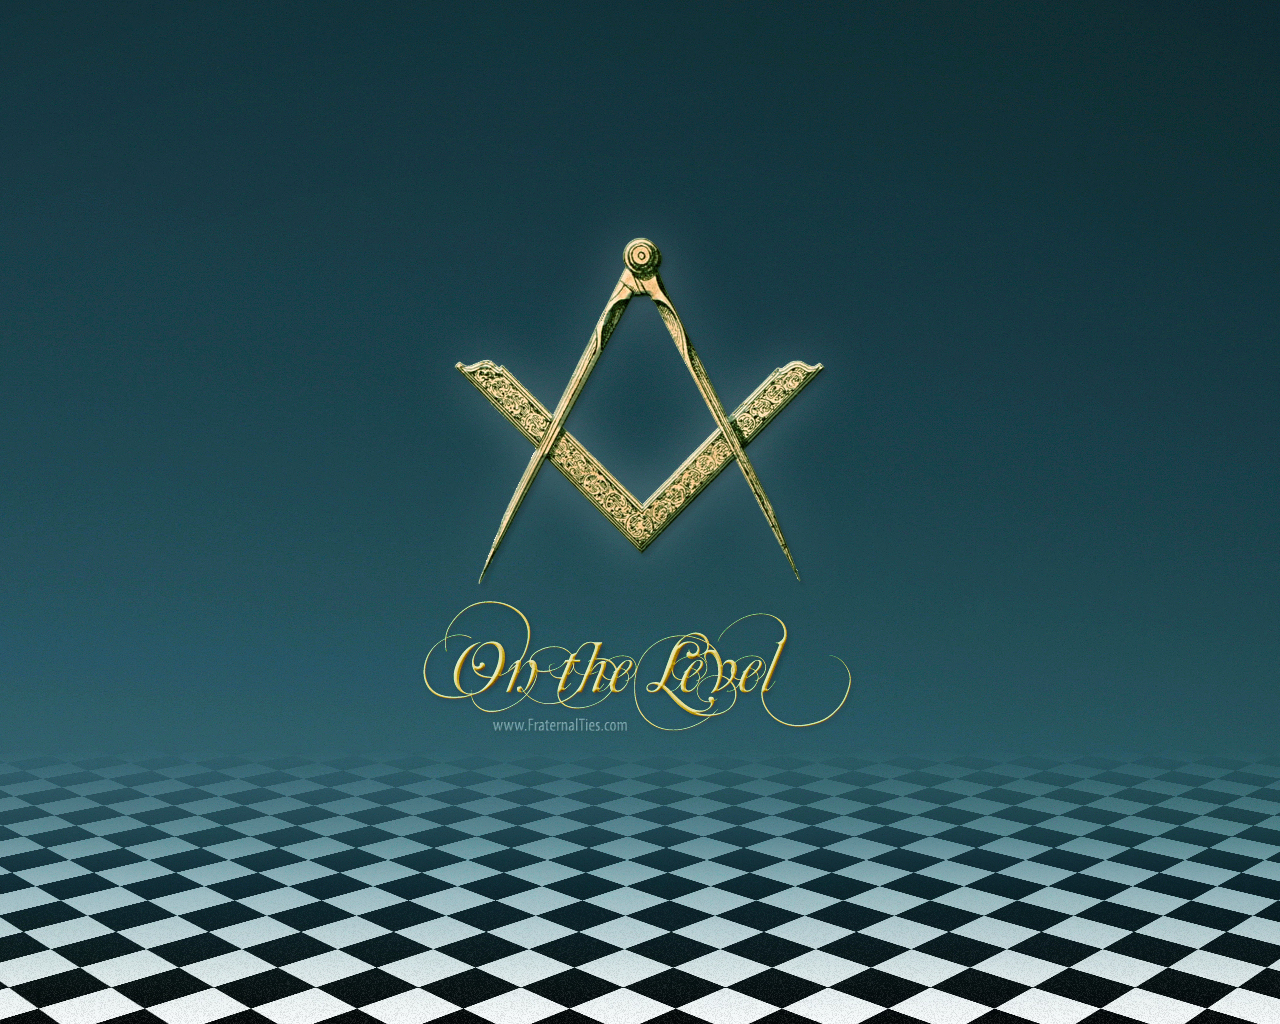 On The Level   Freemason Wallpapers FraternalTies 1280x1024